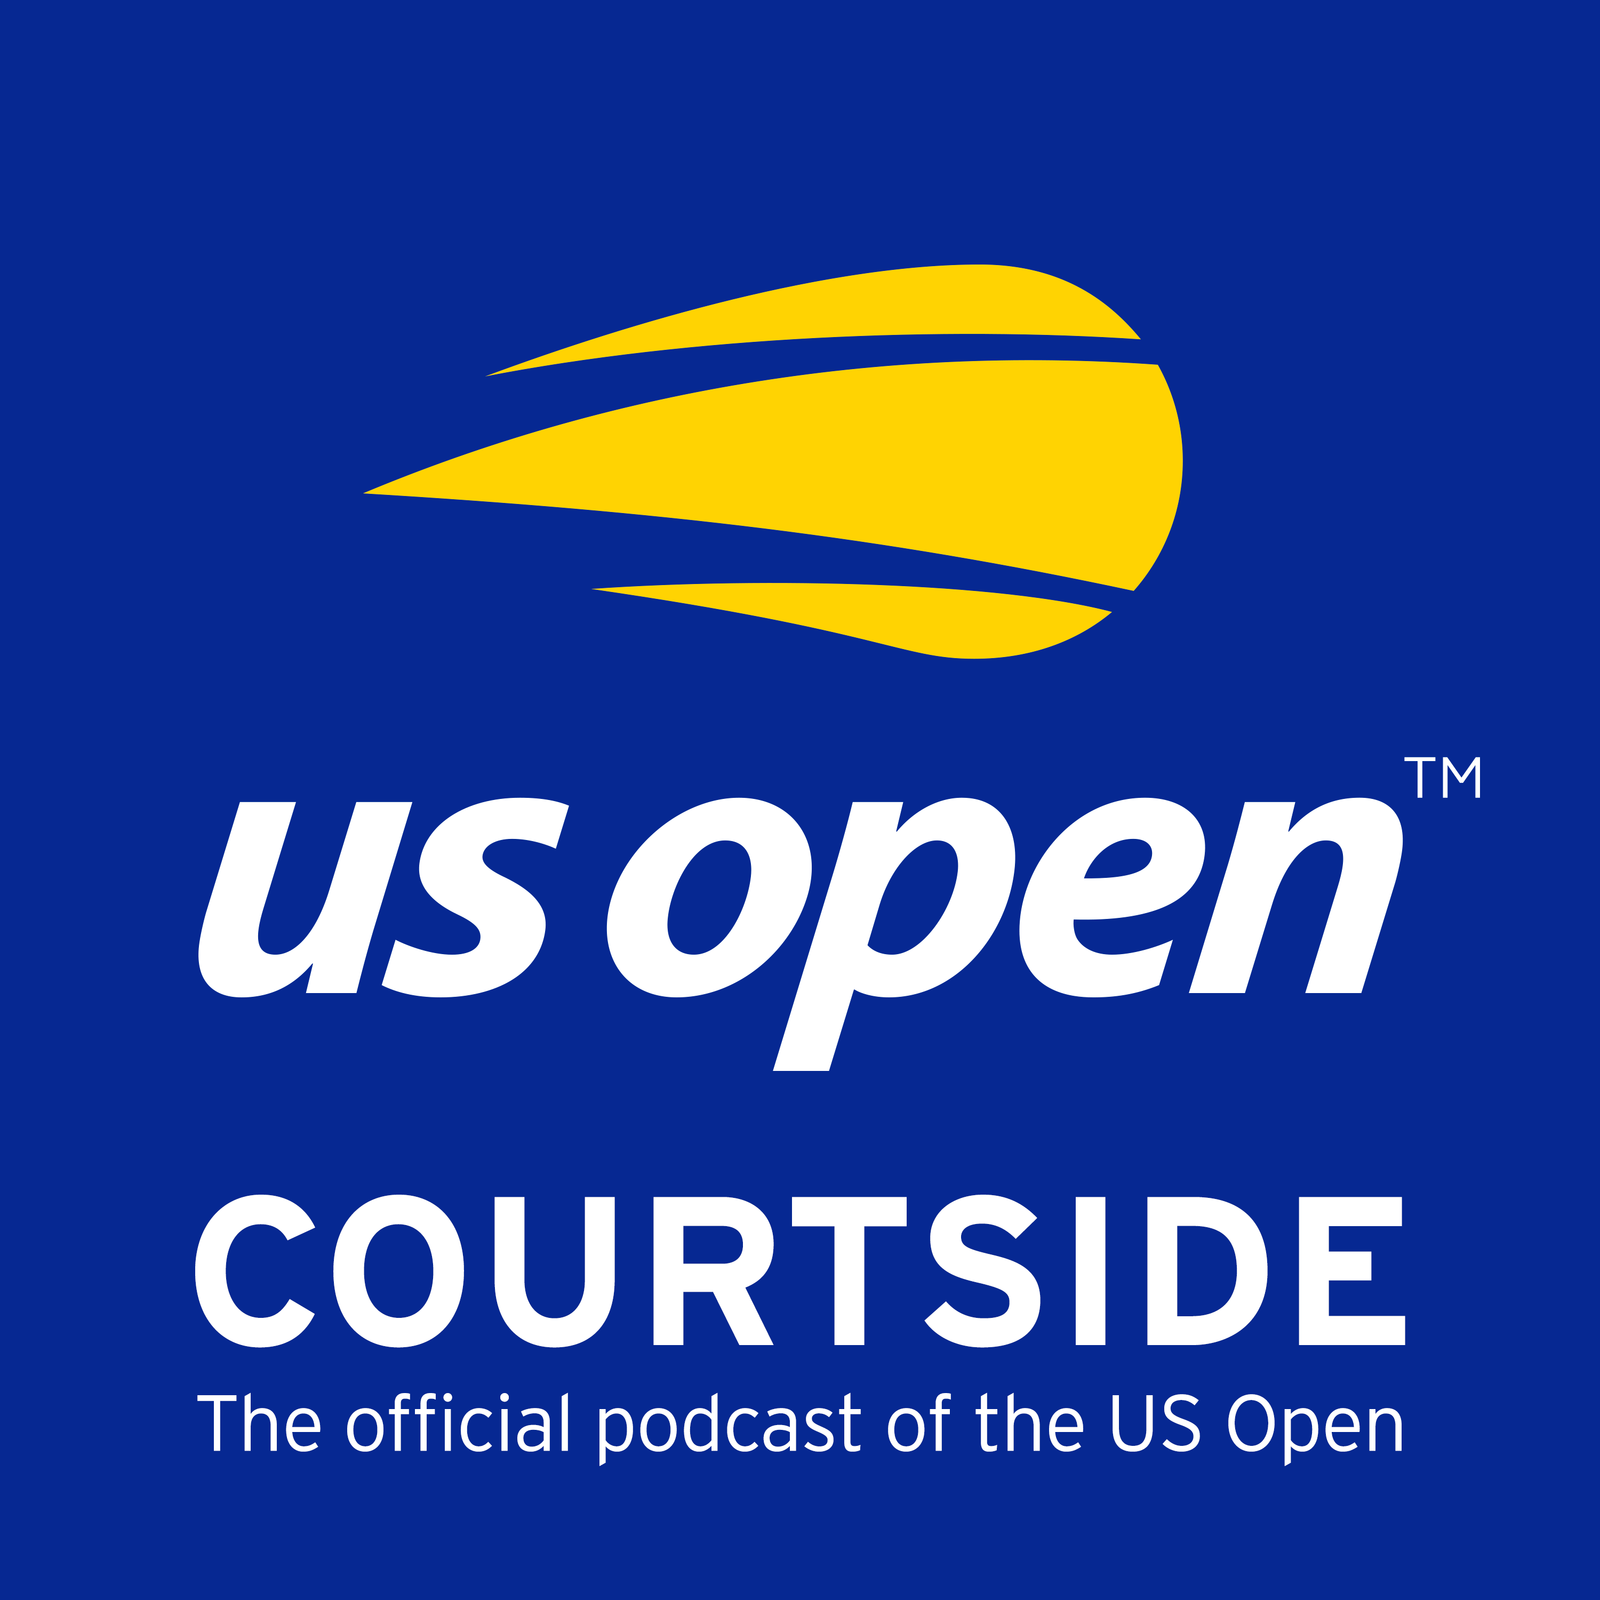 Courtside: The Official Podcast of the US Open